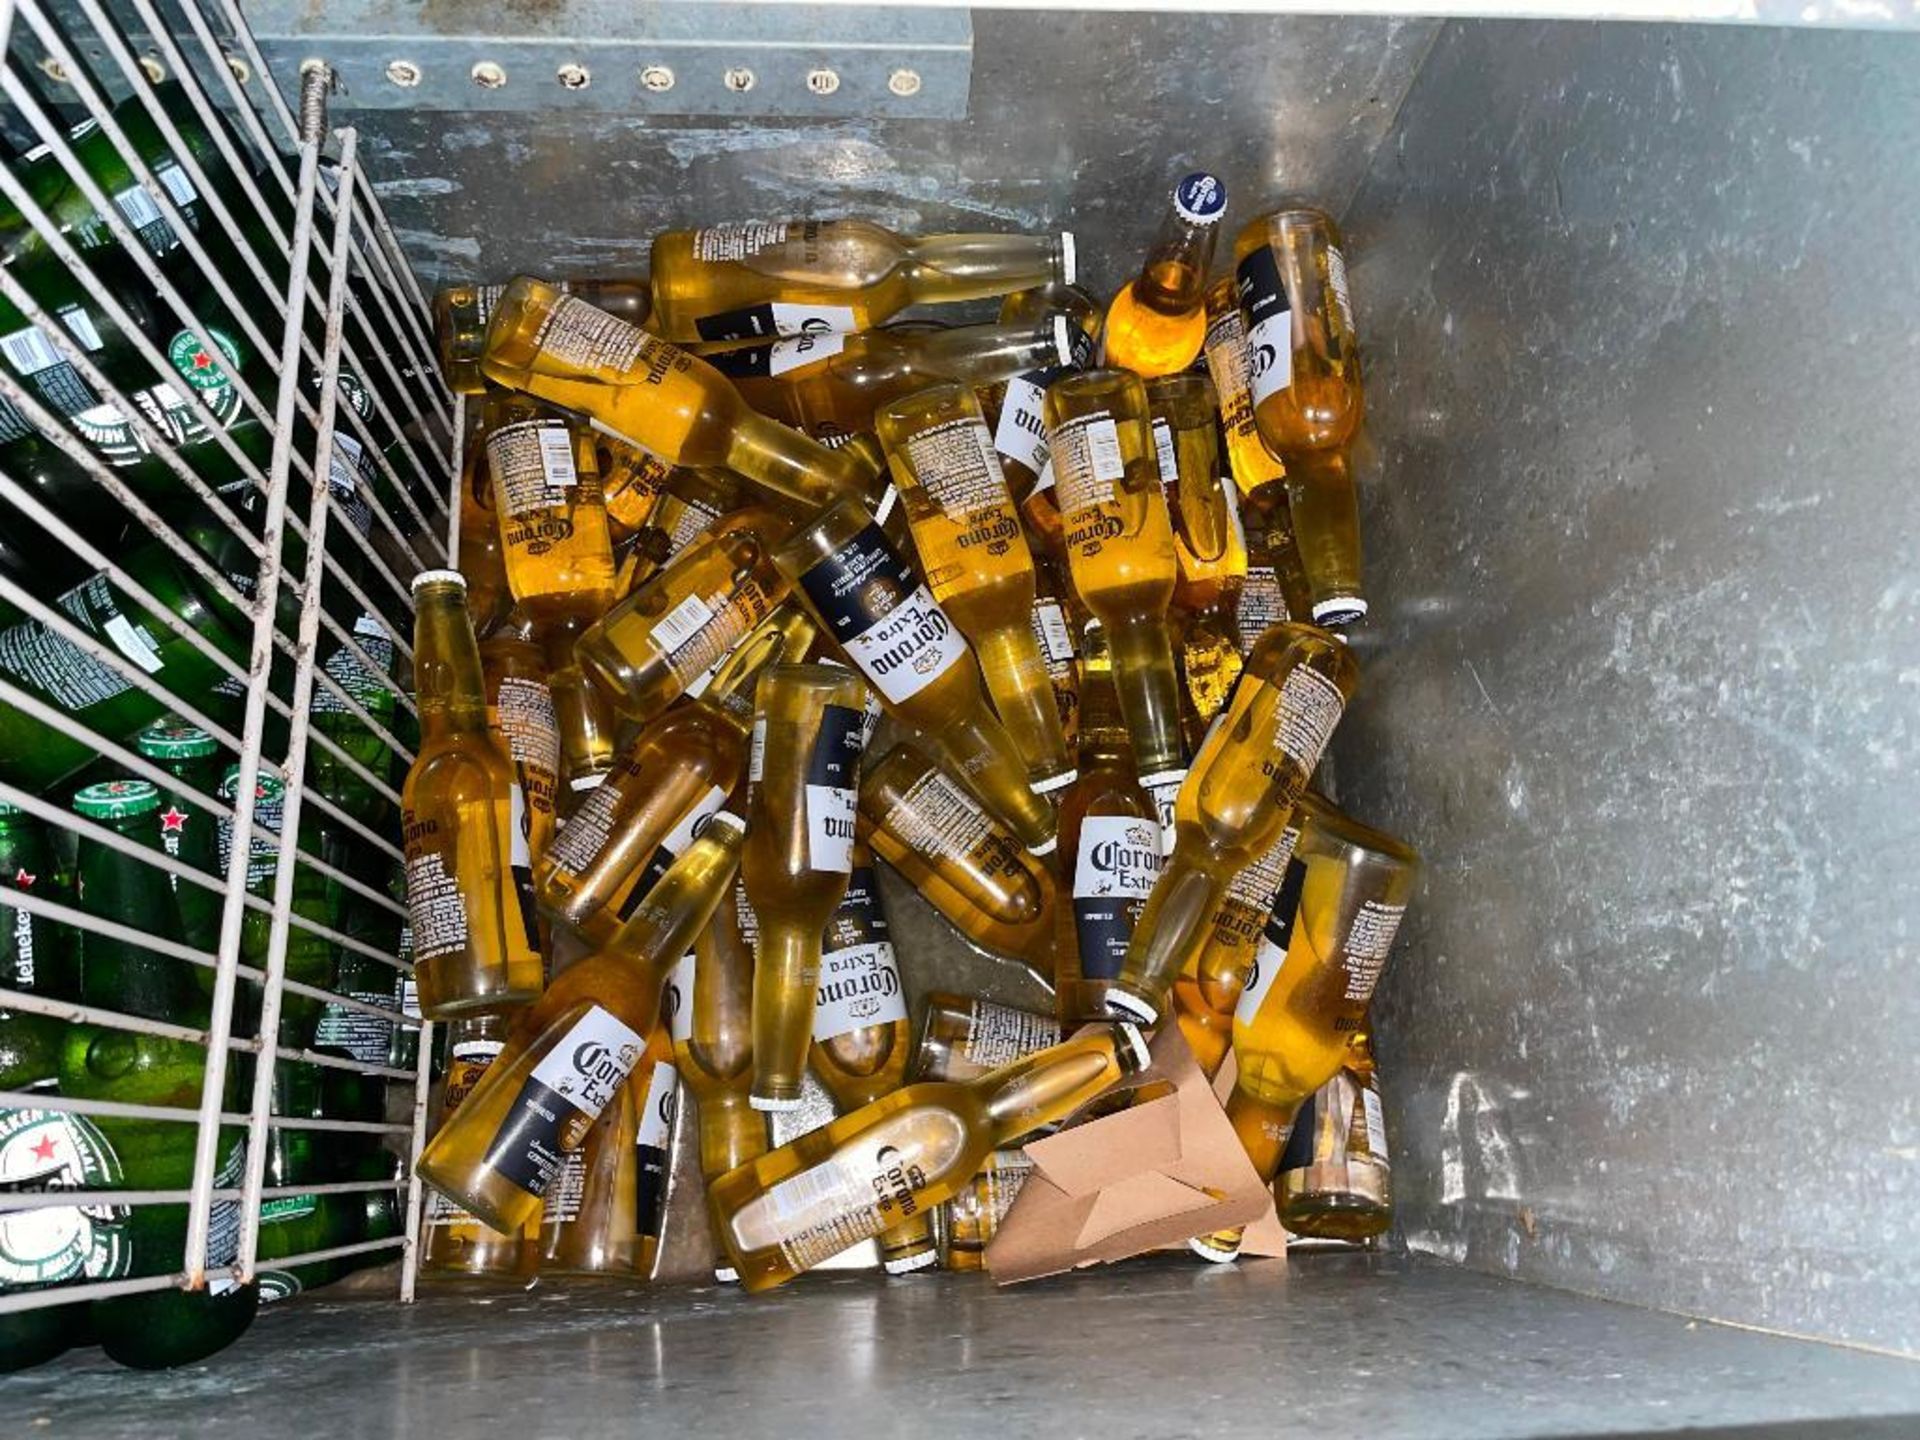 DESCRIPTION: CONTENTS OF LOT #15 - APPROX 100+ BOTTLES OF COLD BEER. ADDITIONAL INFORMATION FIRST DA - Image 5 of 5